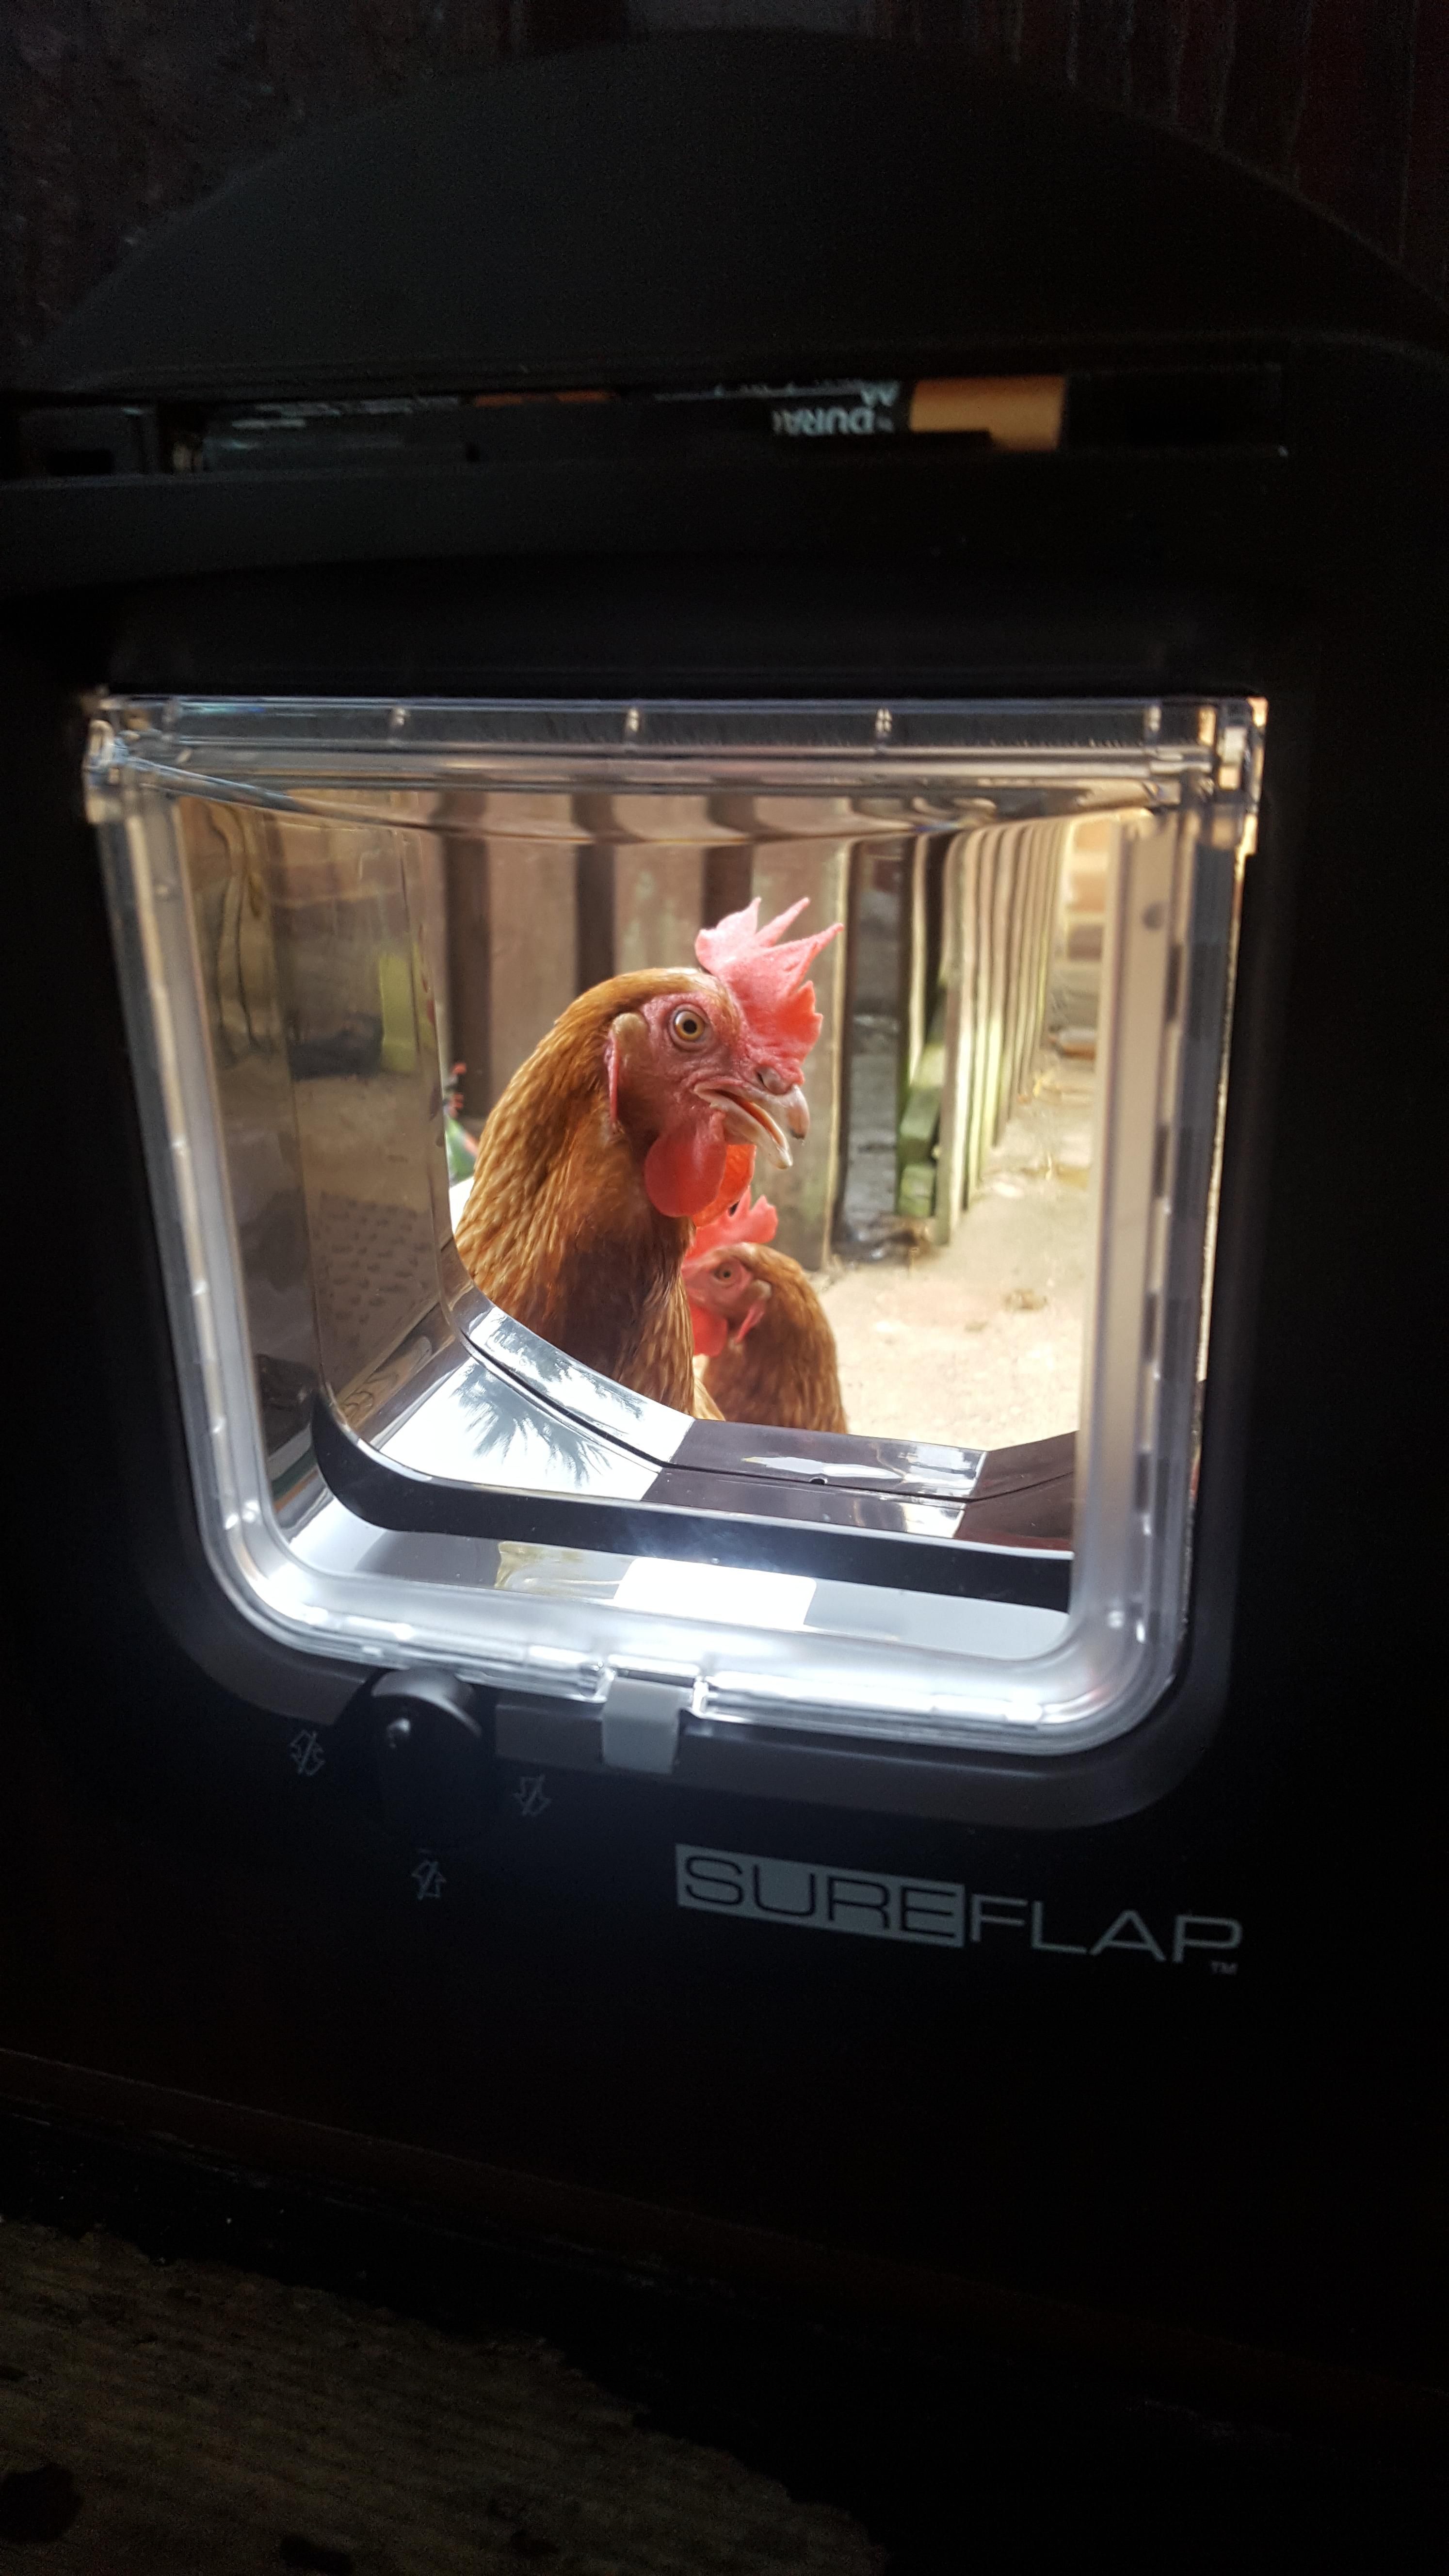 Successfully installed new microchip catflap. Now I have a couple of ladies in a fowl mood because they can't come in.